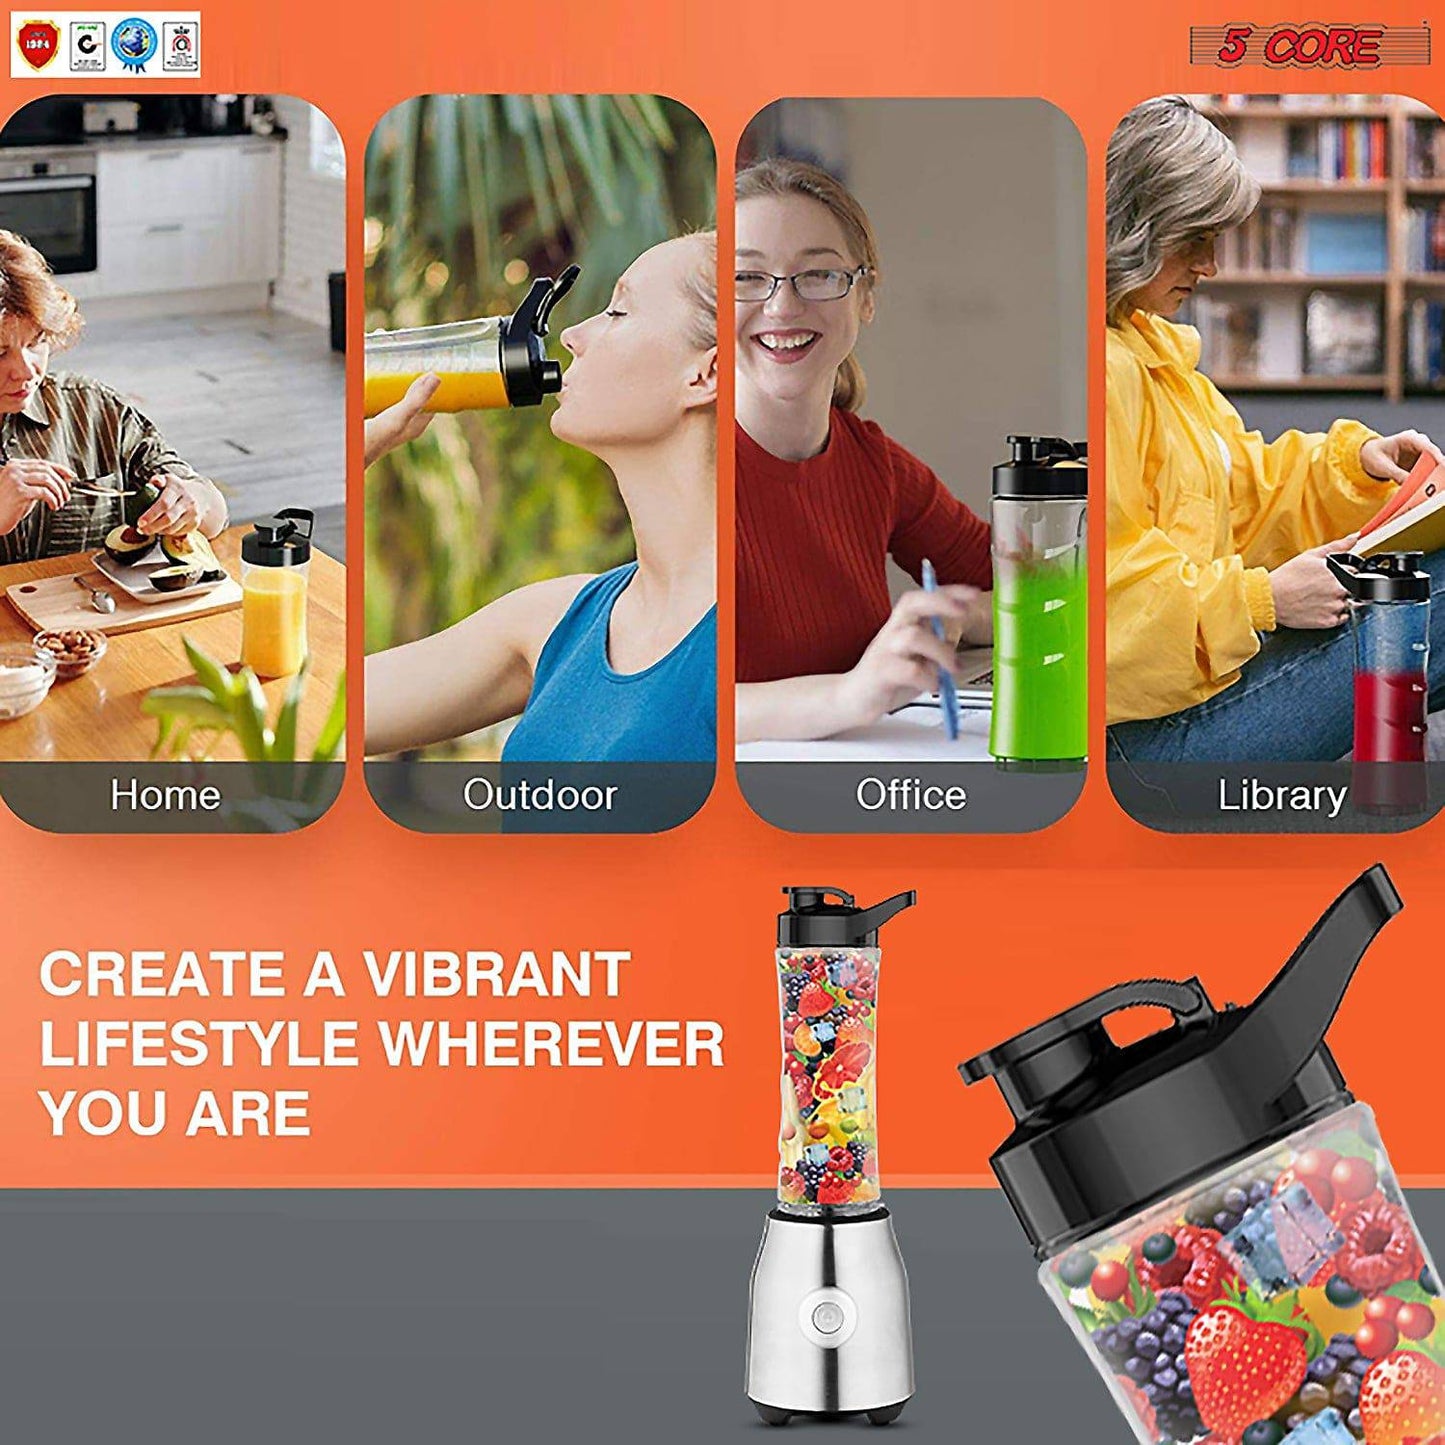 5 Core Portable Blenders For Kitchen 20 Oz Capacity 300W Personal